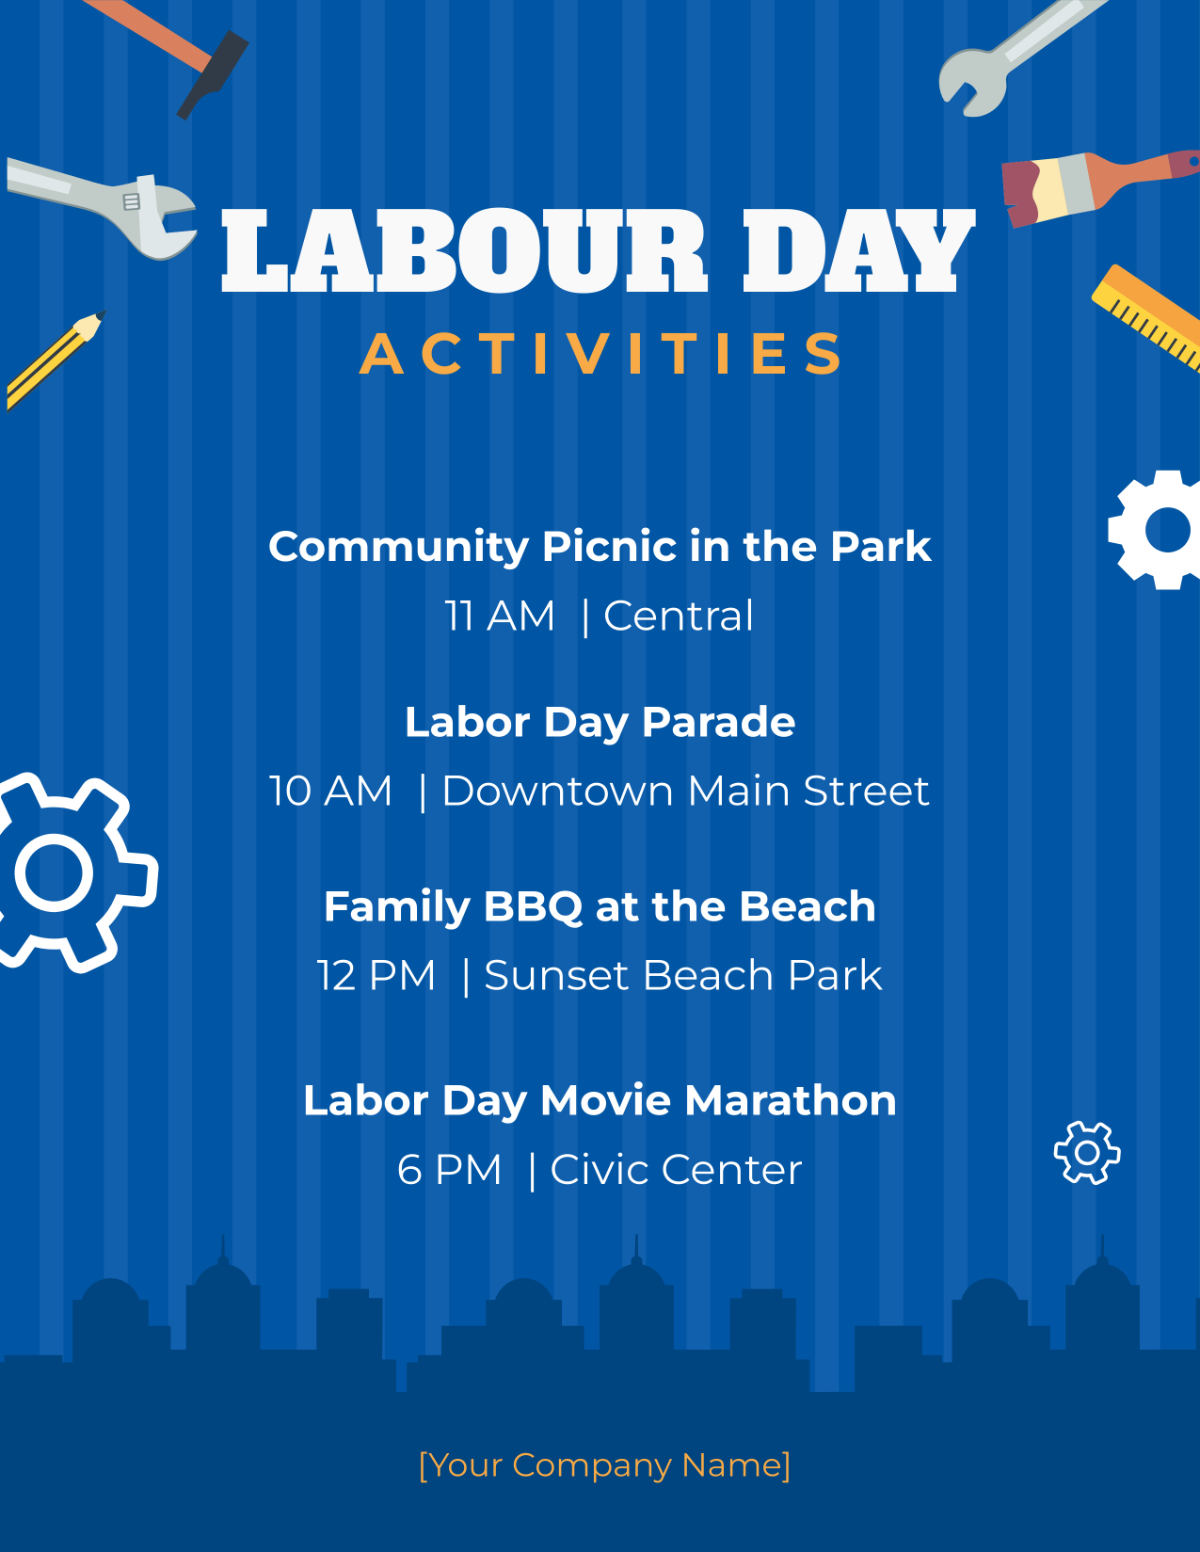 Labour day Activities